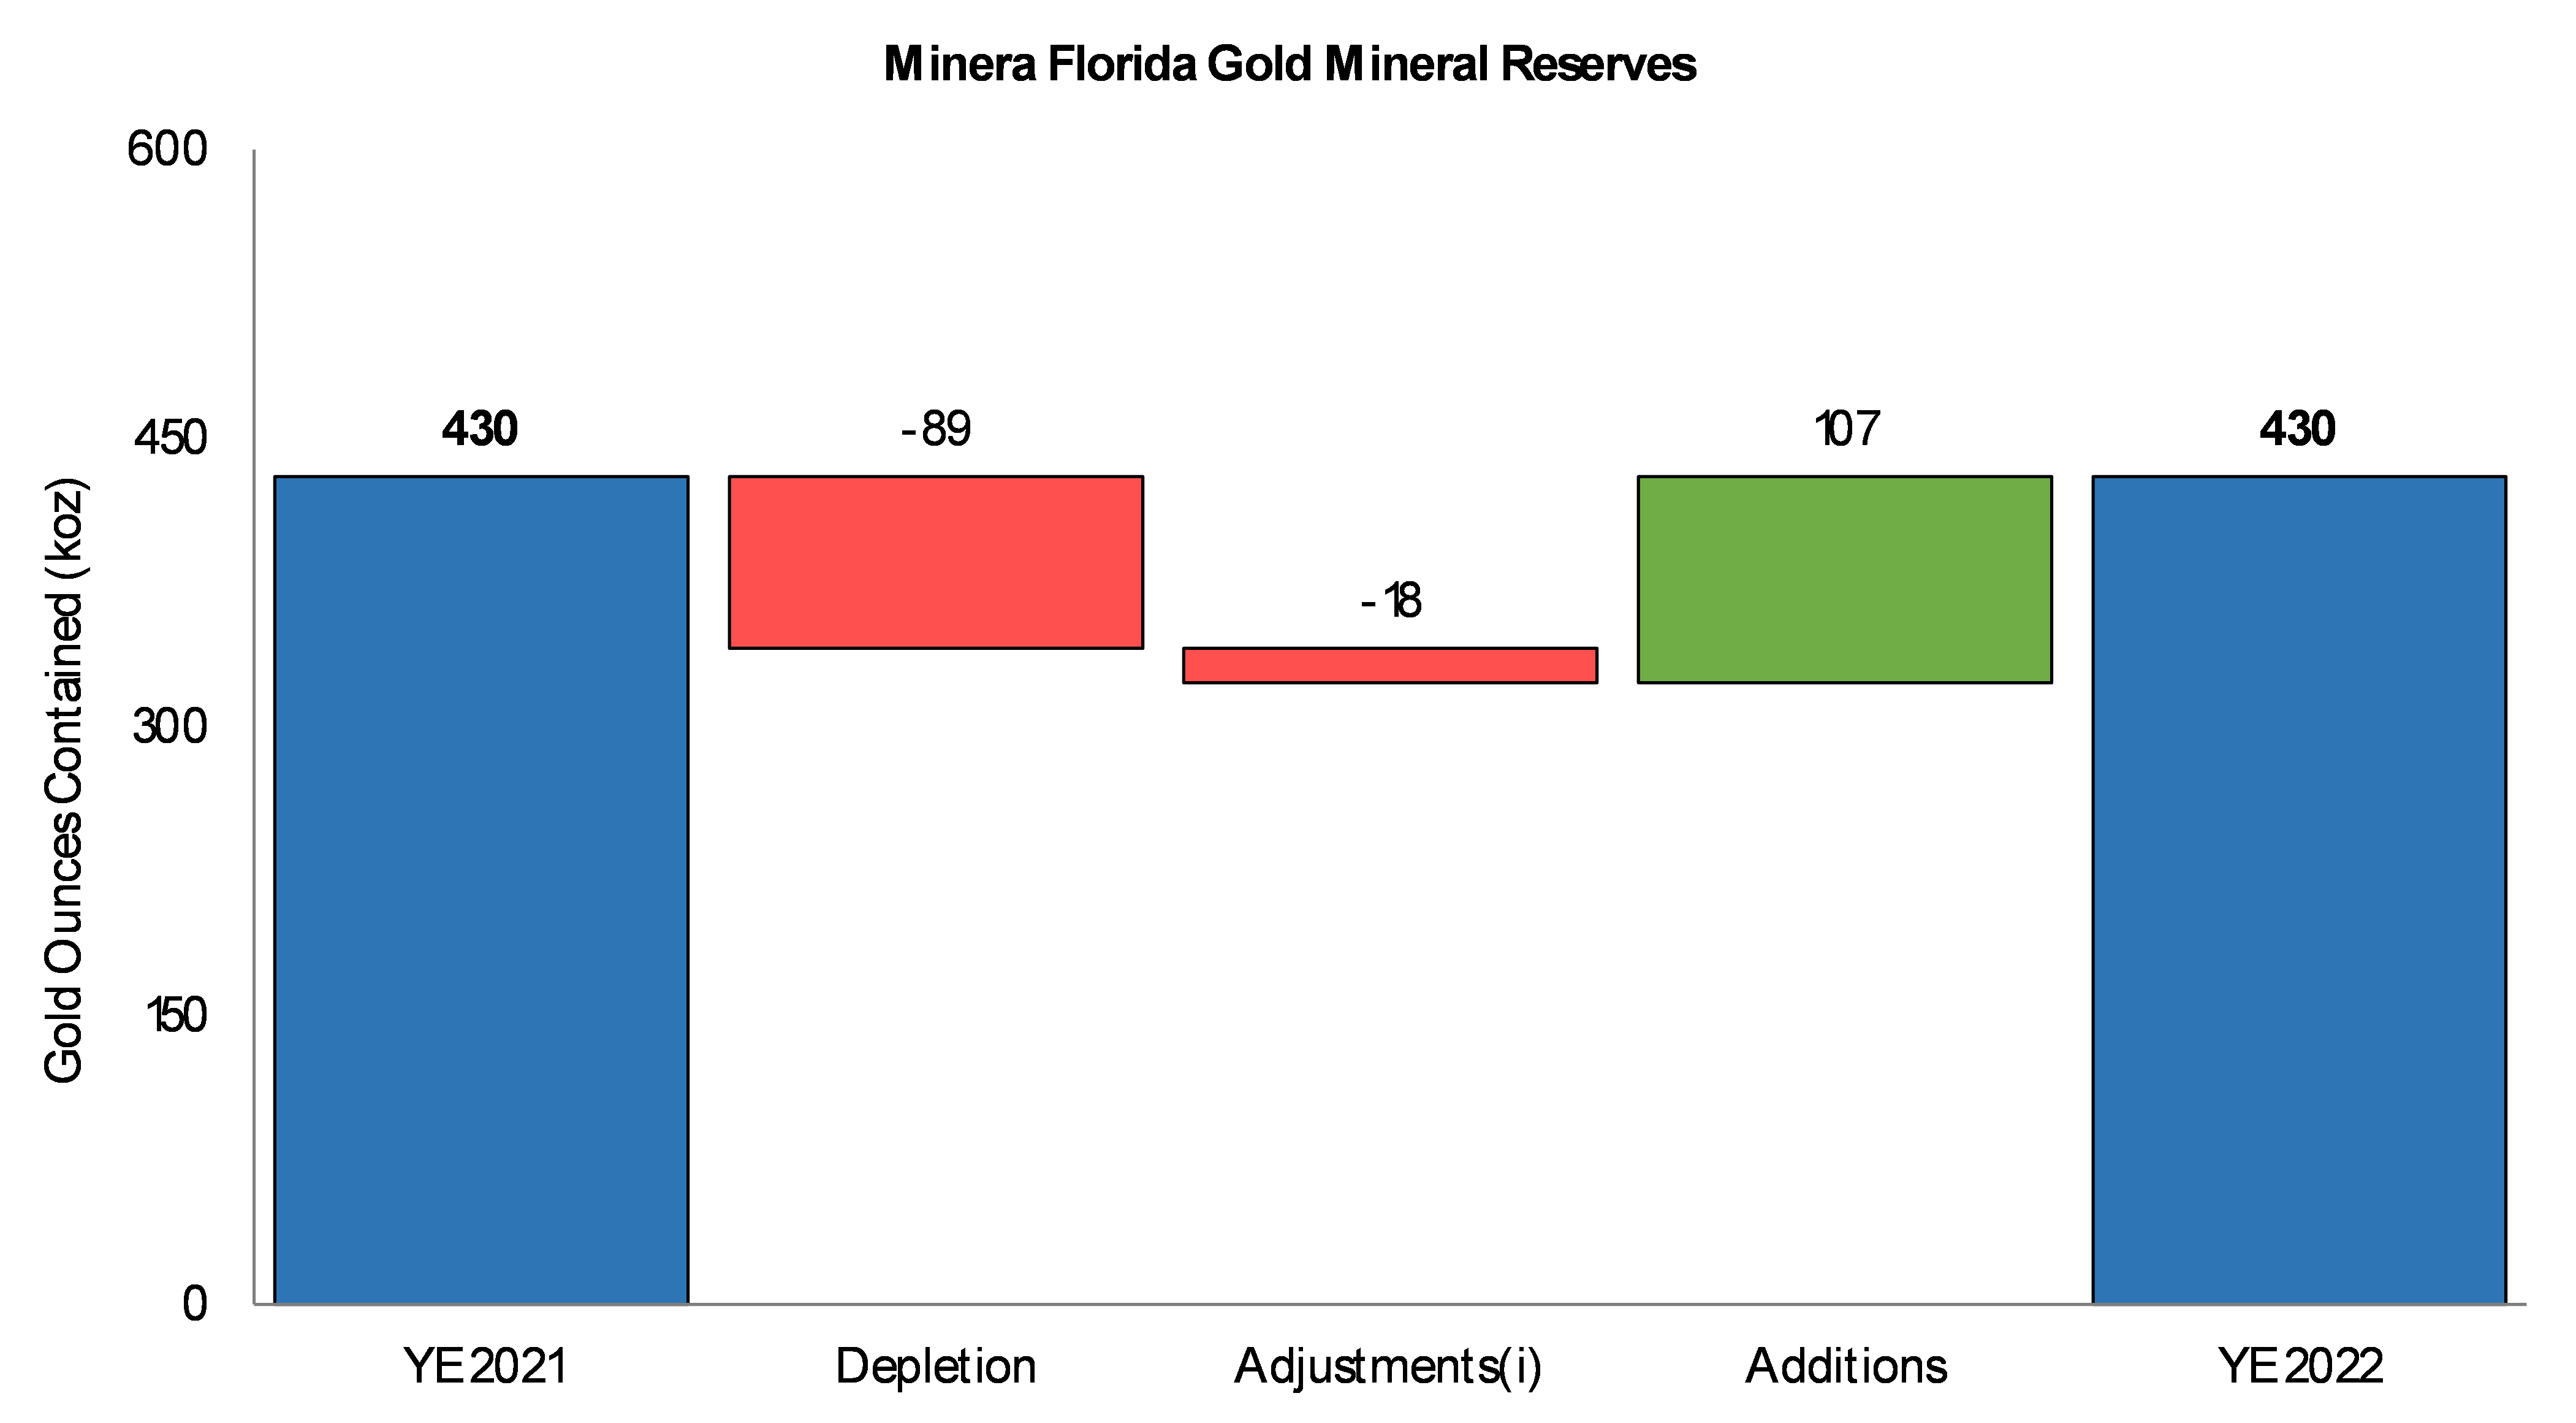 Change in Proven and Probable Mineral Reserves at Minera Florida